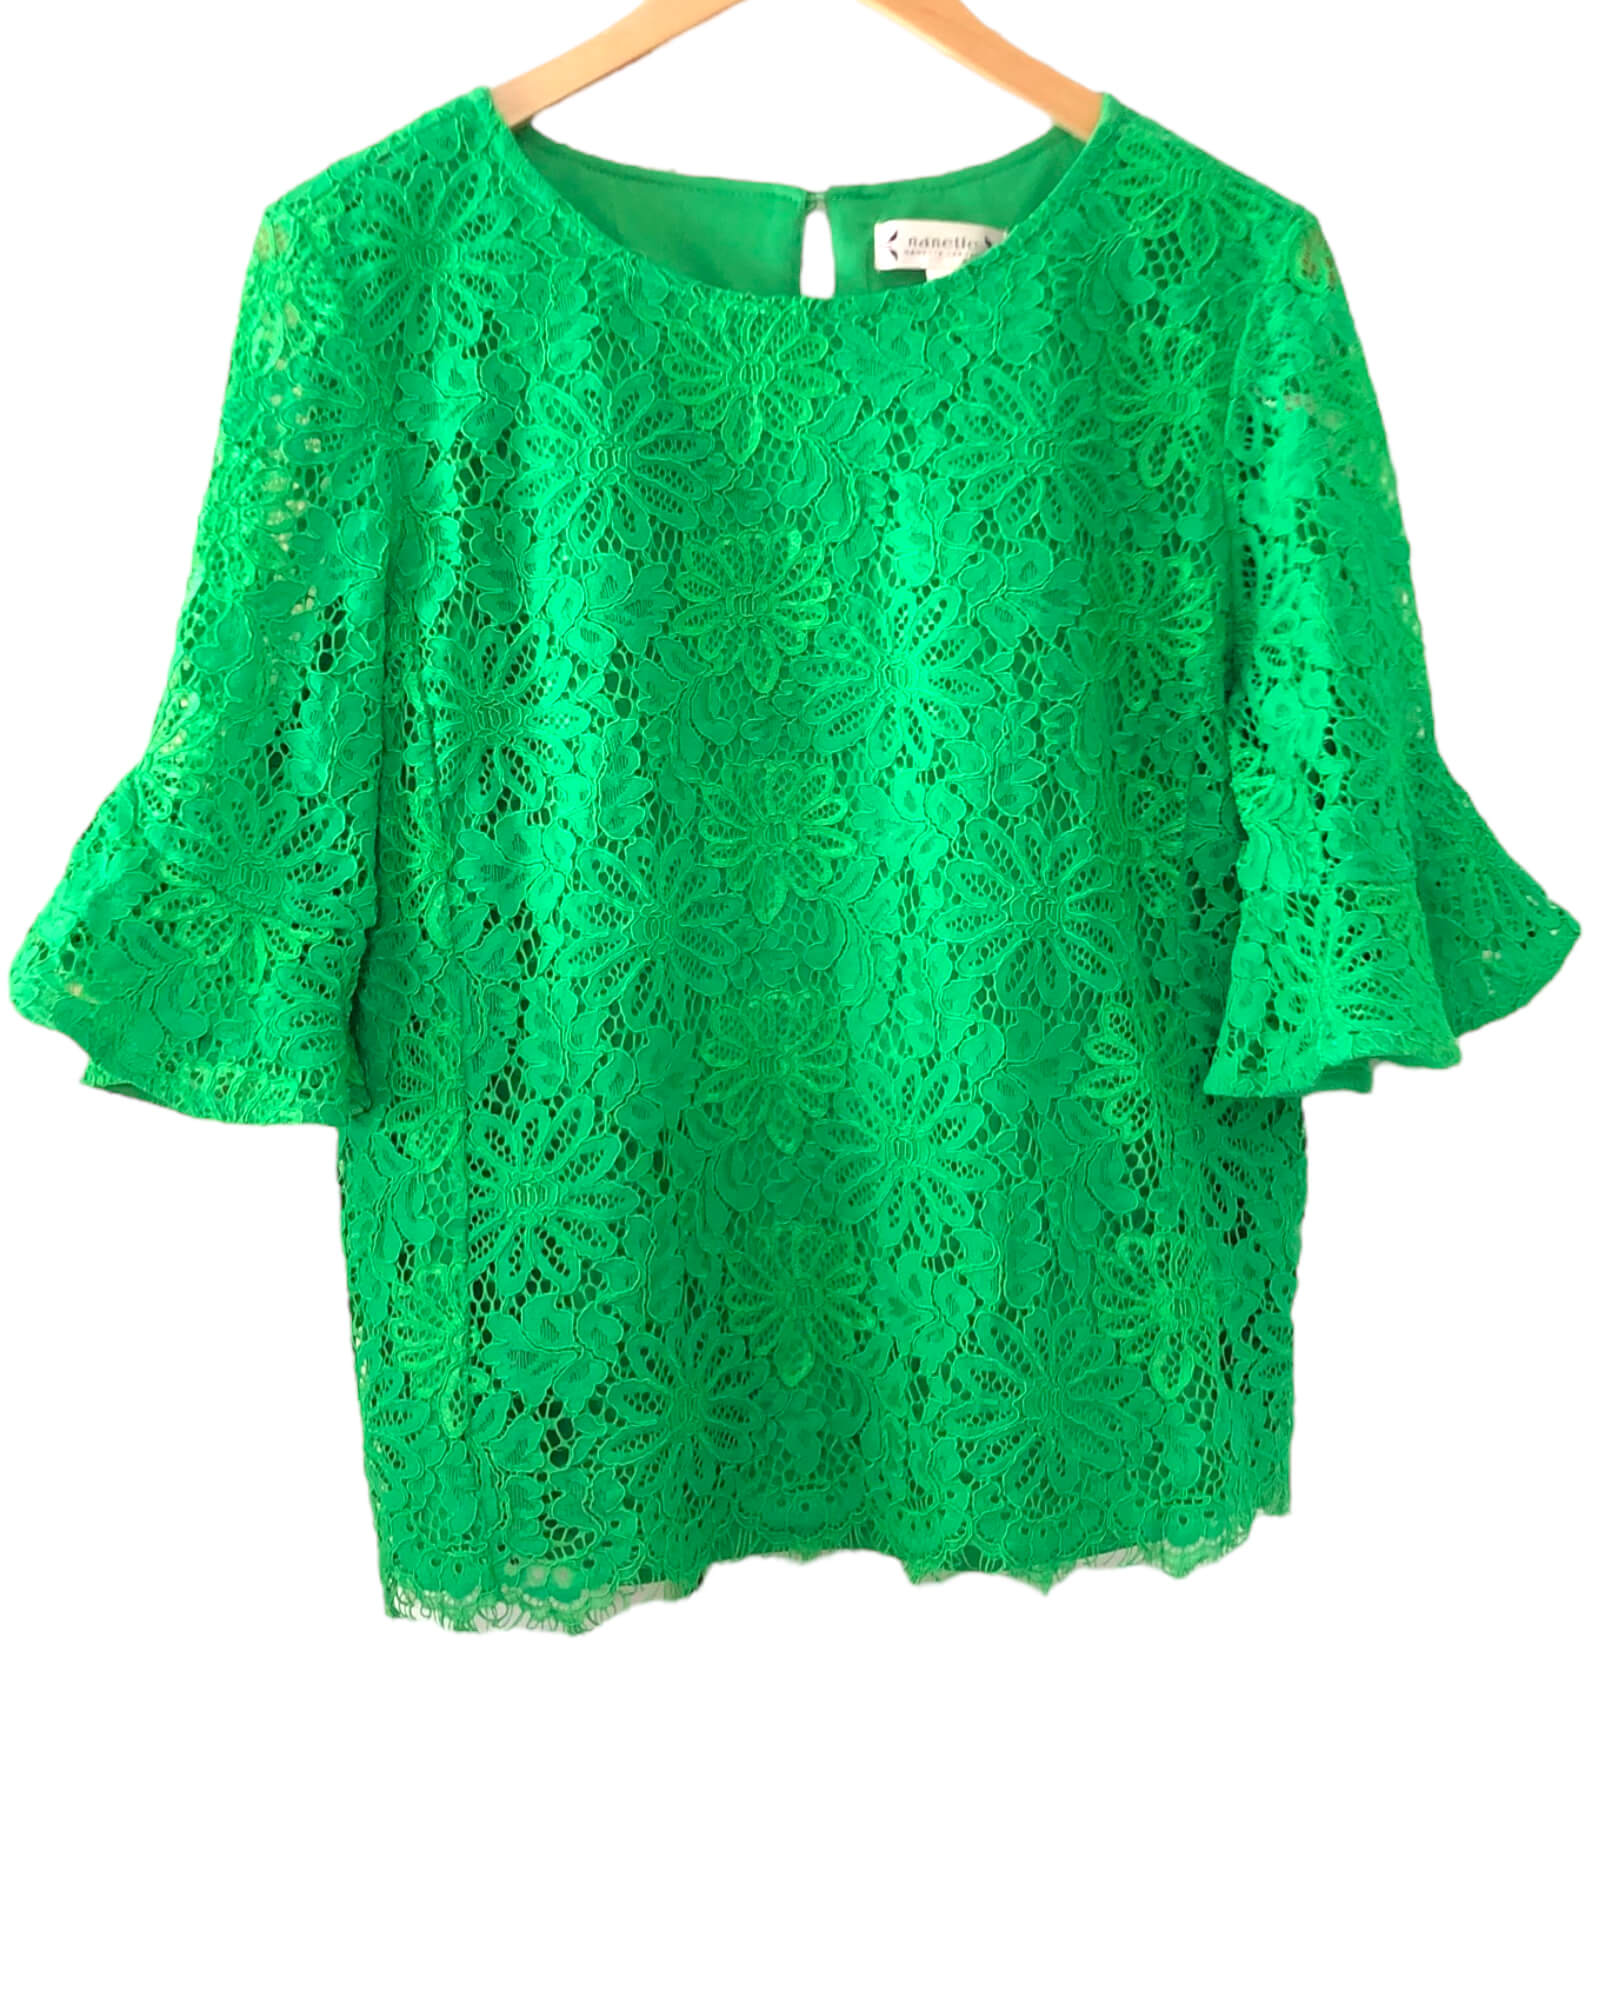 Bright Spring NANETTE LEPORE hidden meadow Spring Fling green lace top blouse